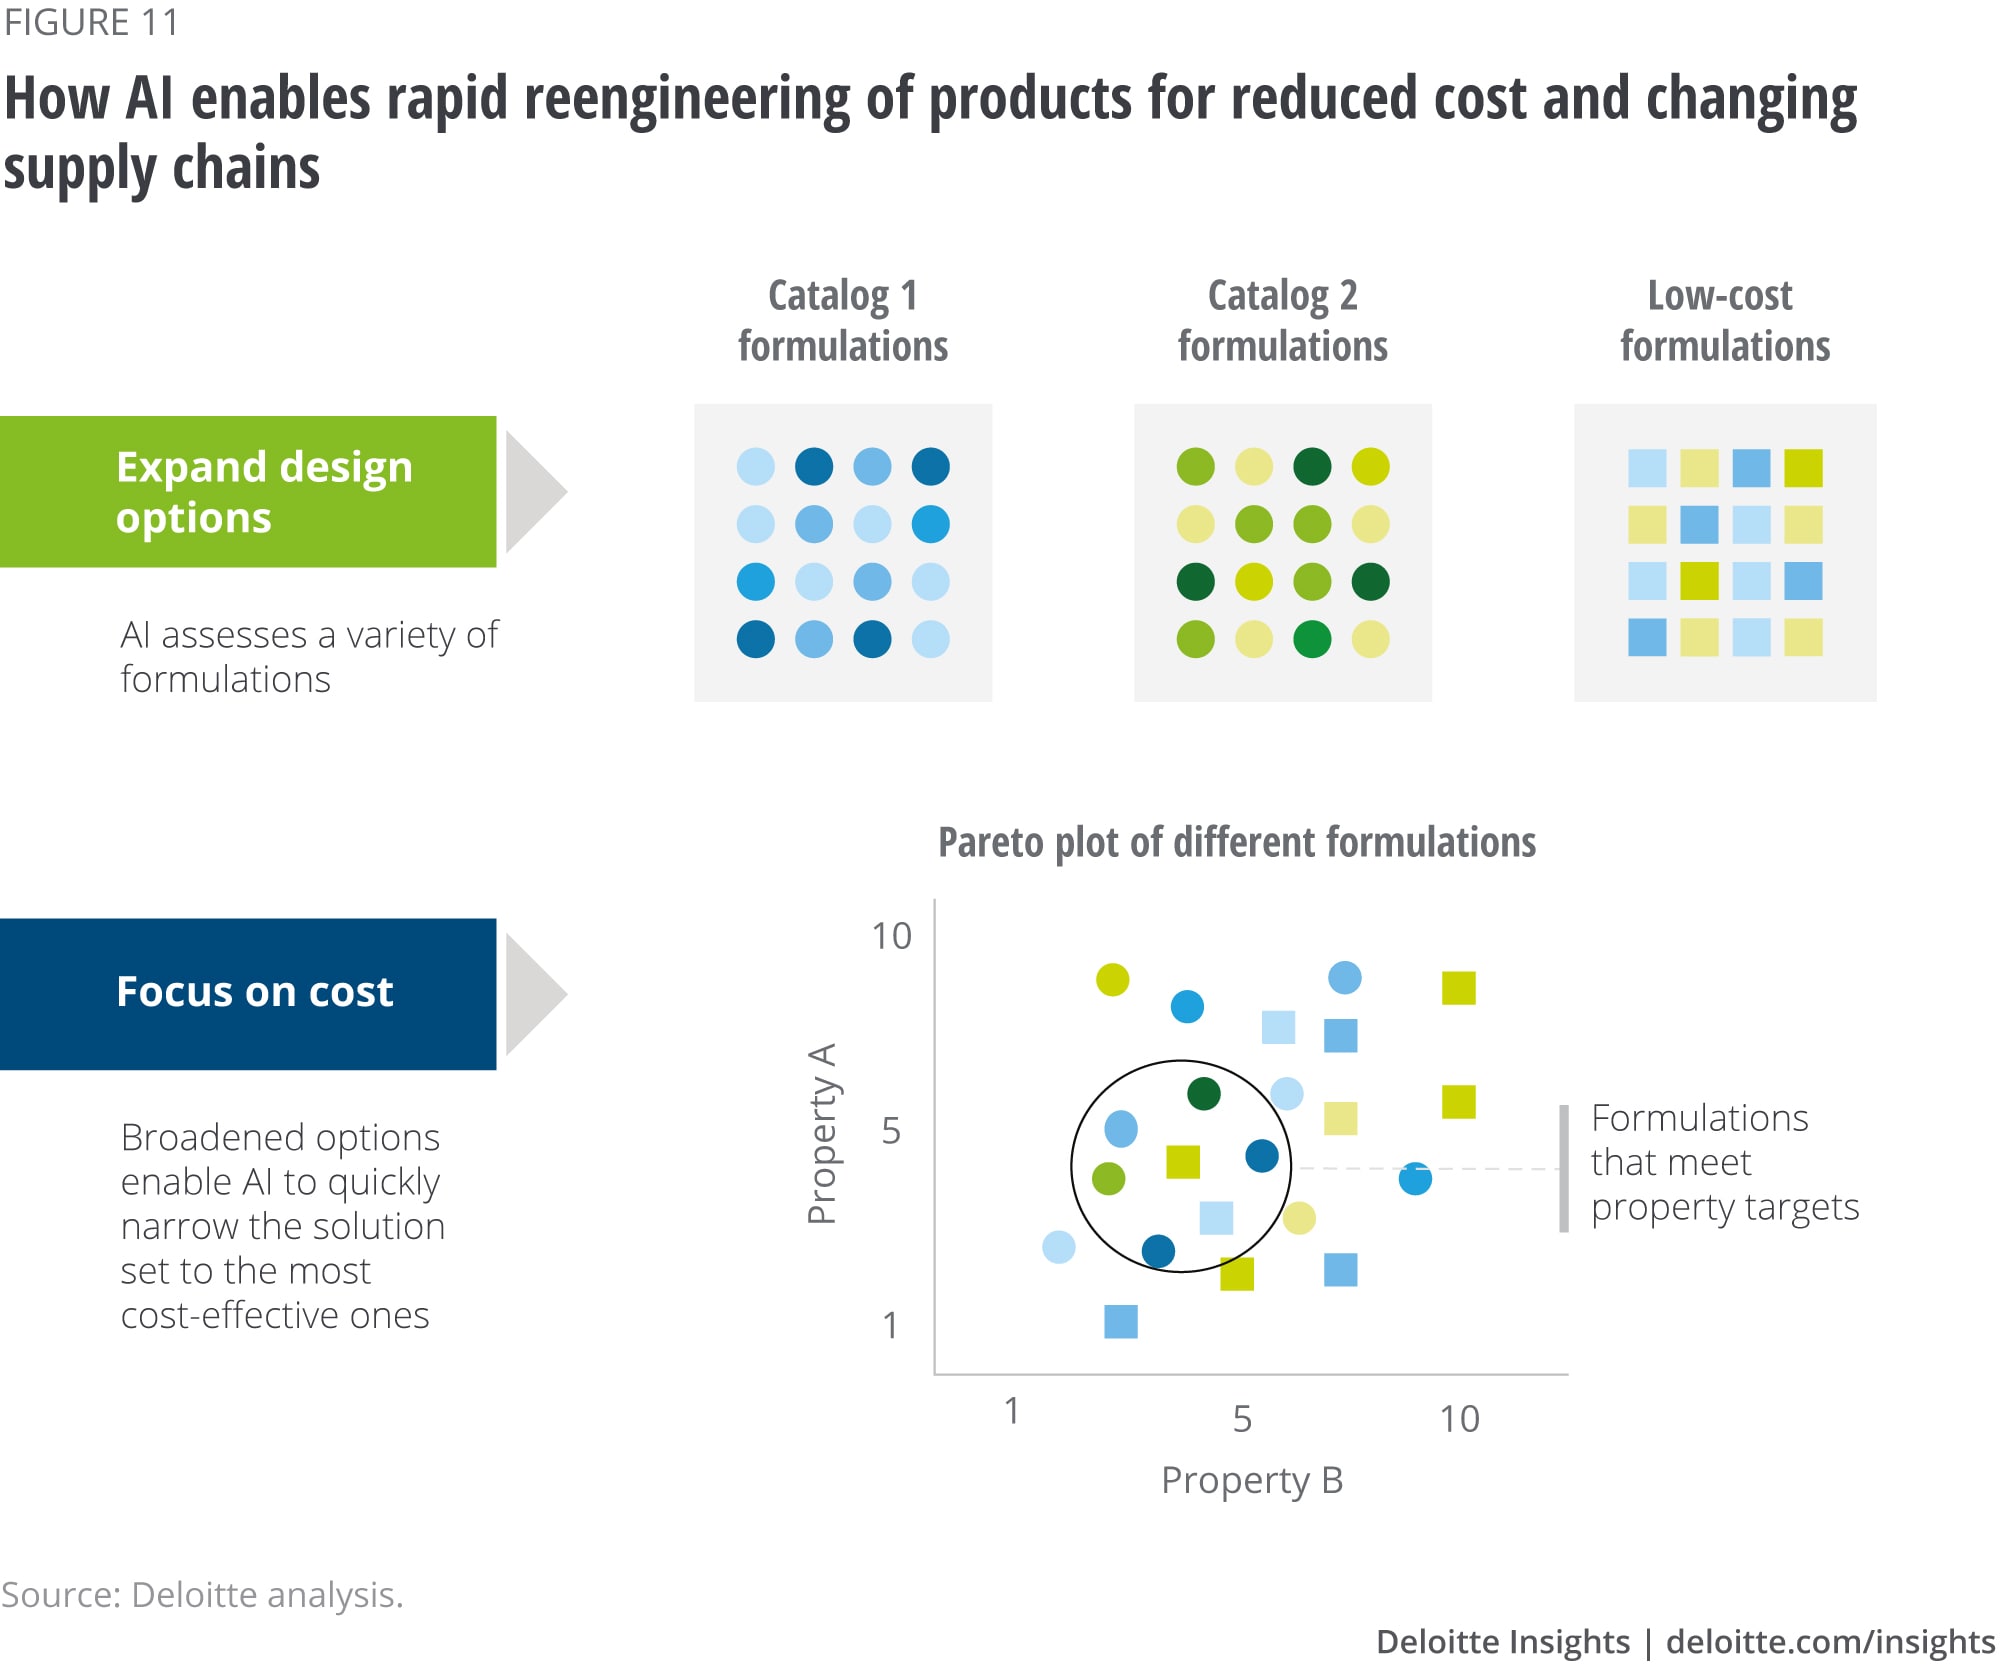 An illustration of how AI enables rapidly reengineering products for reduced cost and changing supply chains